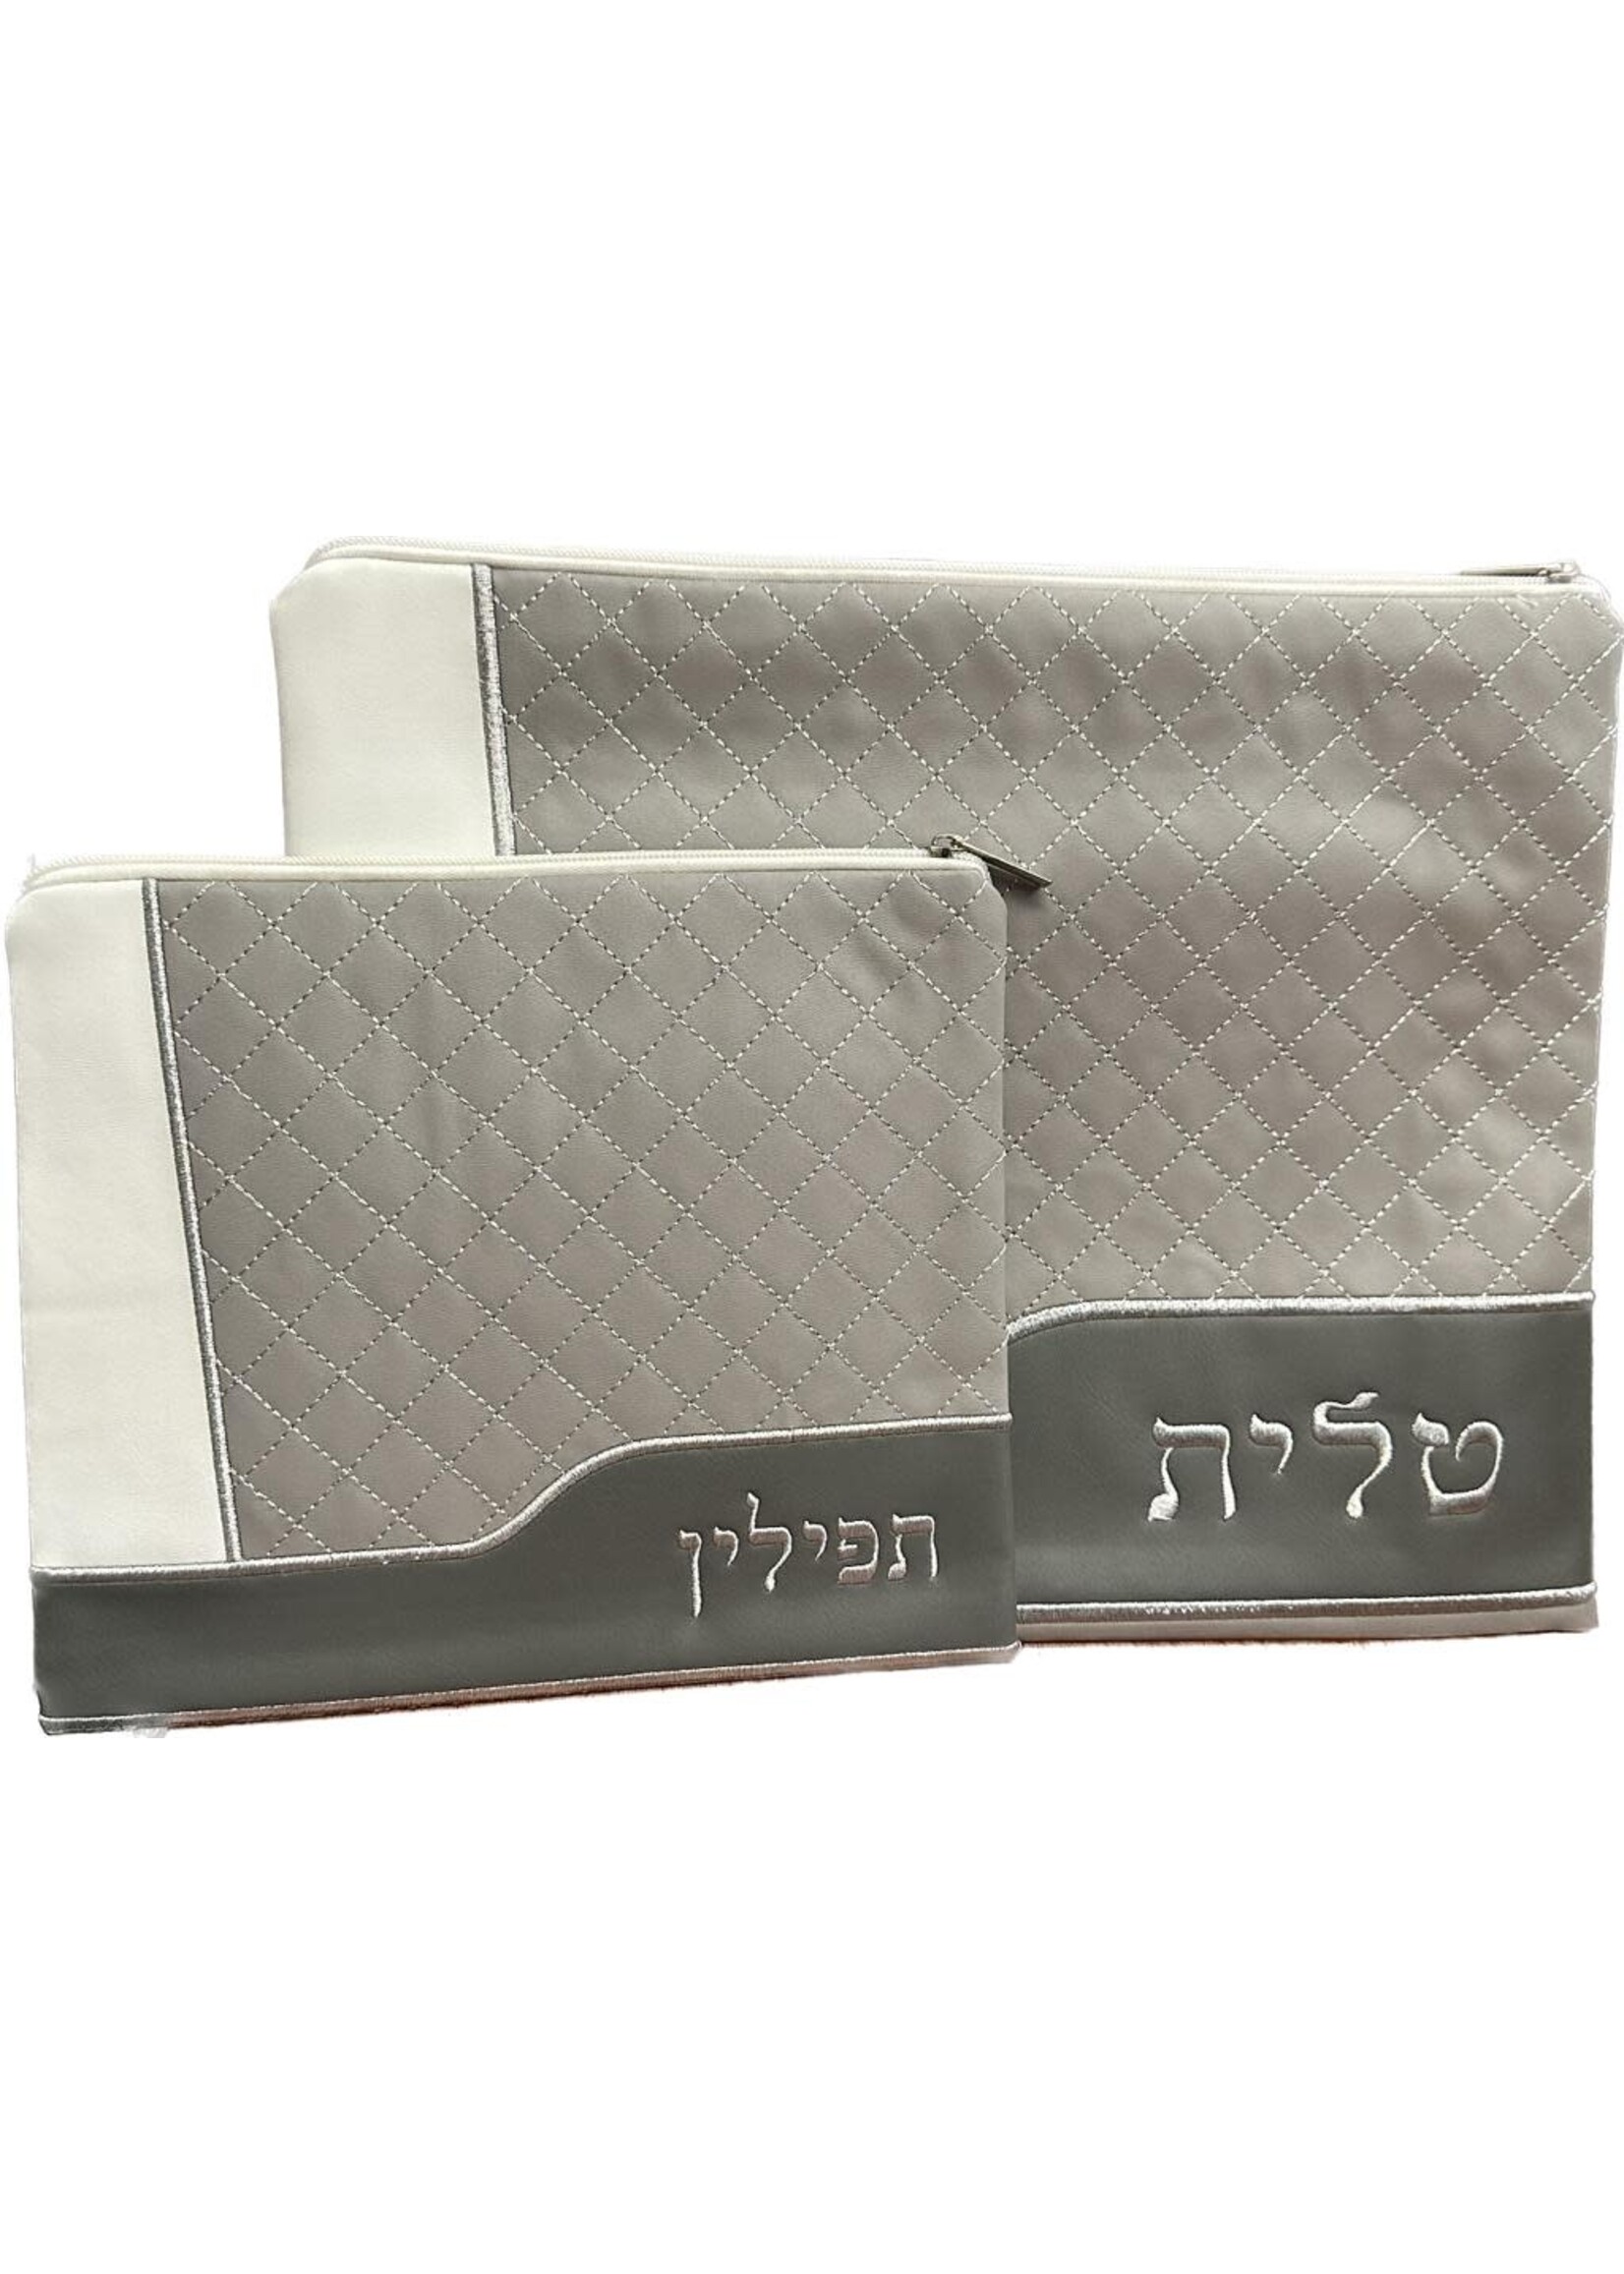 TALLIT BAG SET FAUX LEATHER GRAY  WITH DARK GREY AND CREME DETAIL